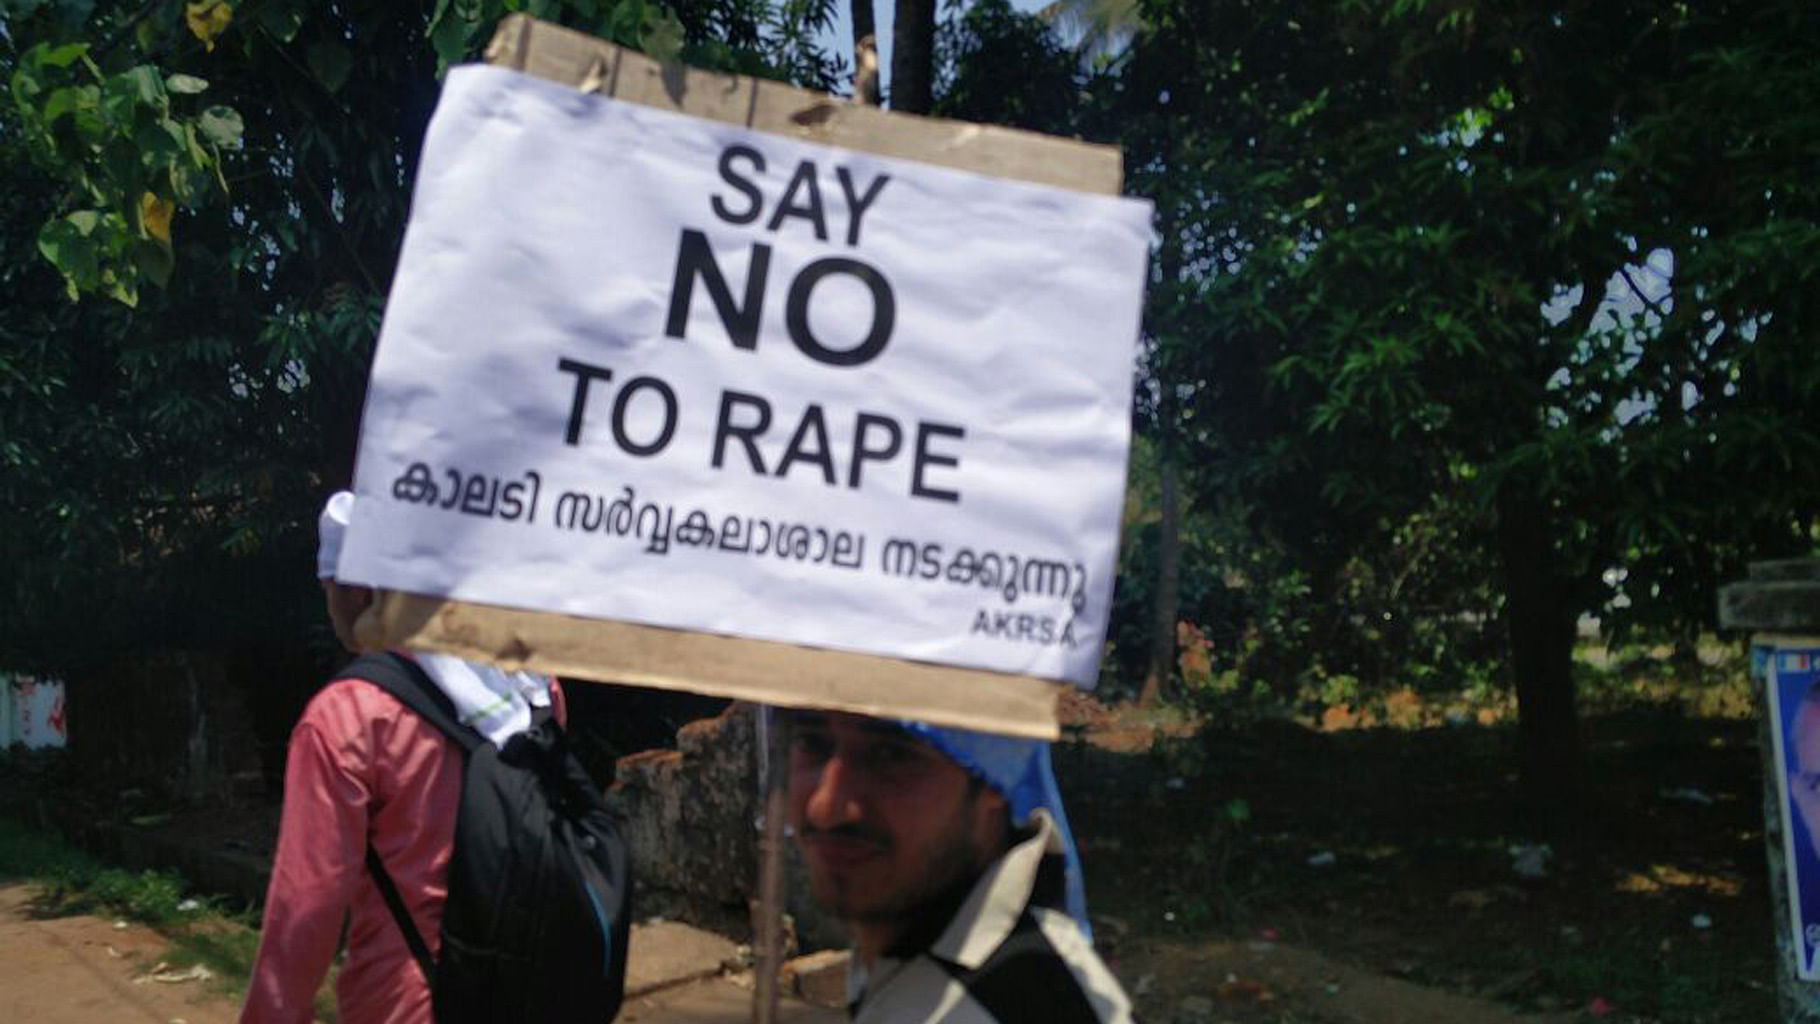 A 30-year-old Dalit woman was brutally raped and killed in Ernakulam district in Kerala.(Photo: <b>The Quint</b>)